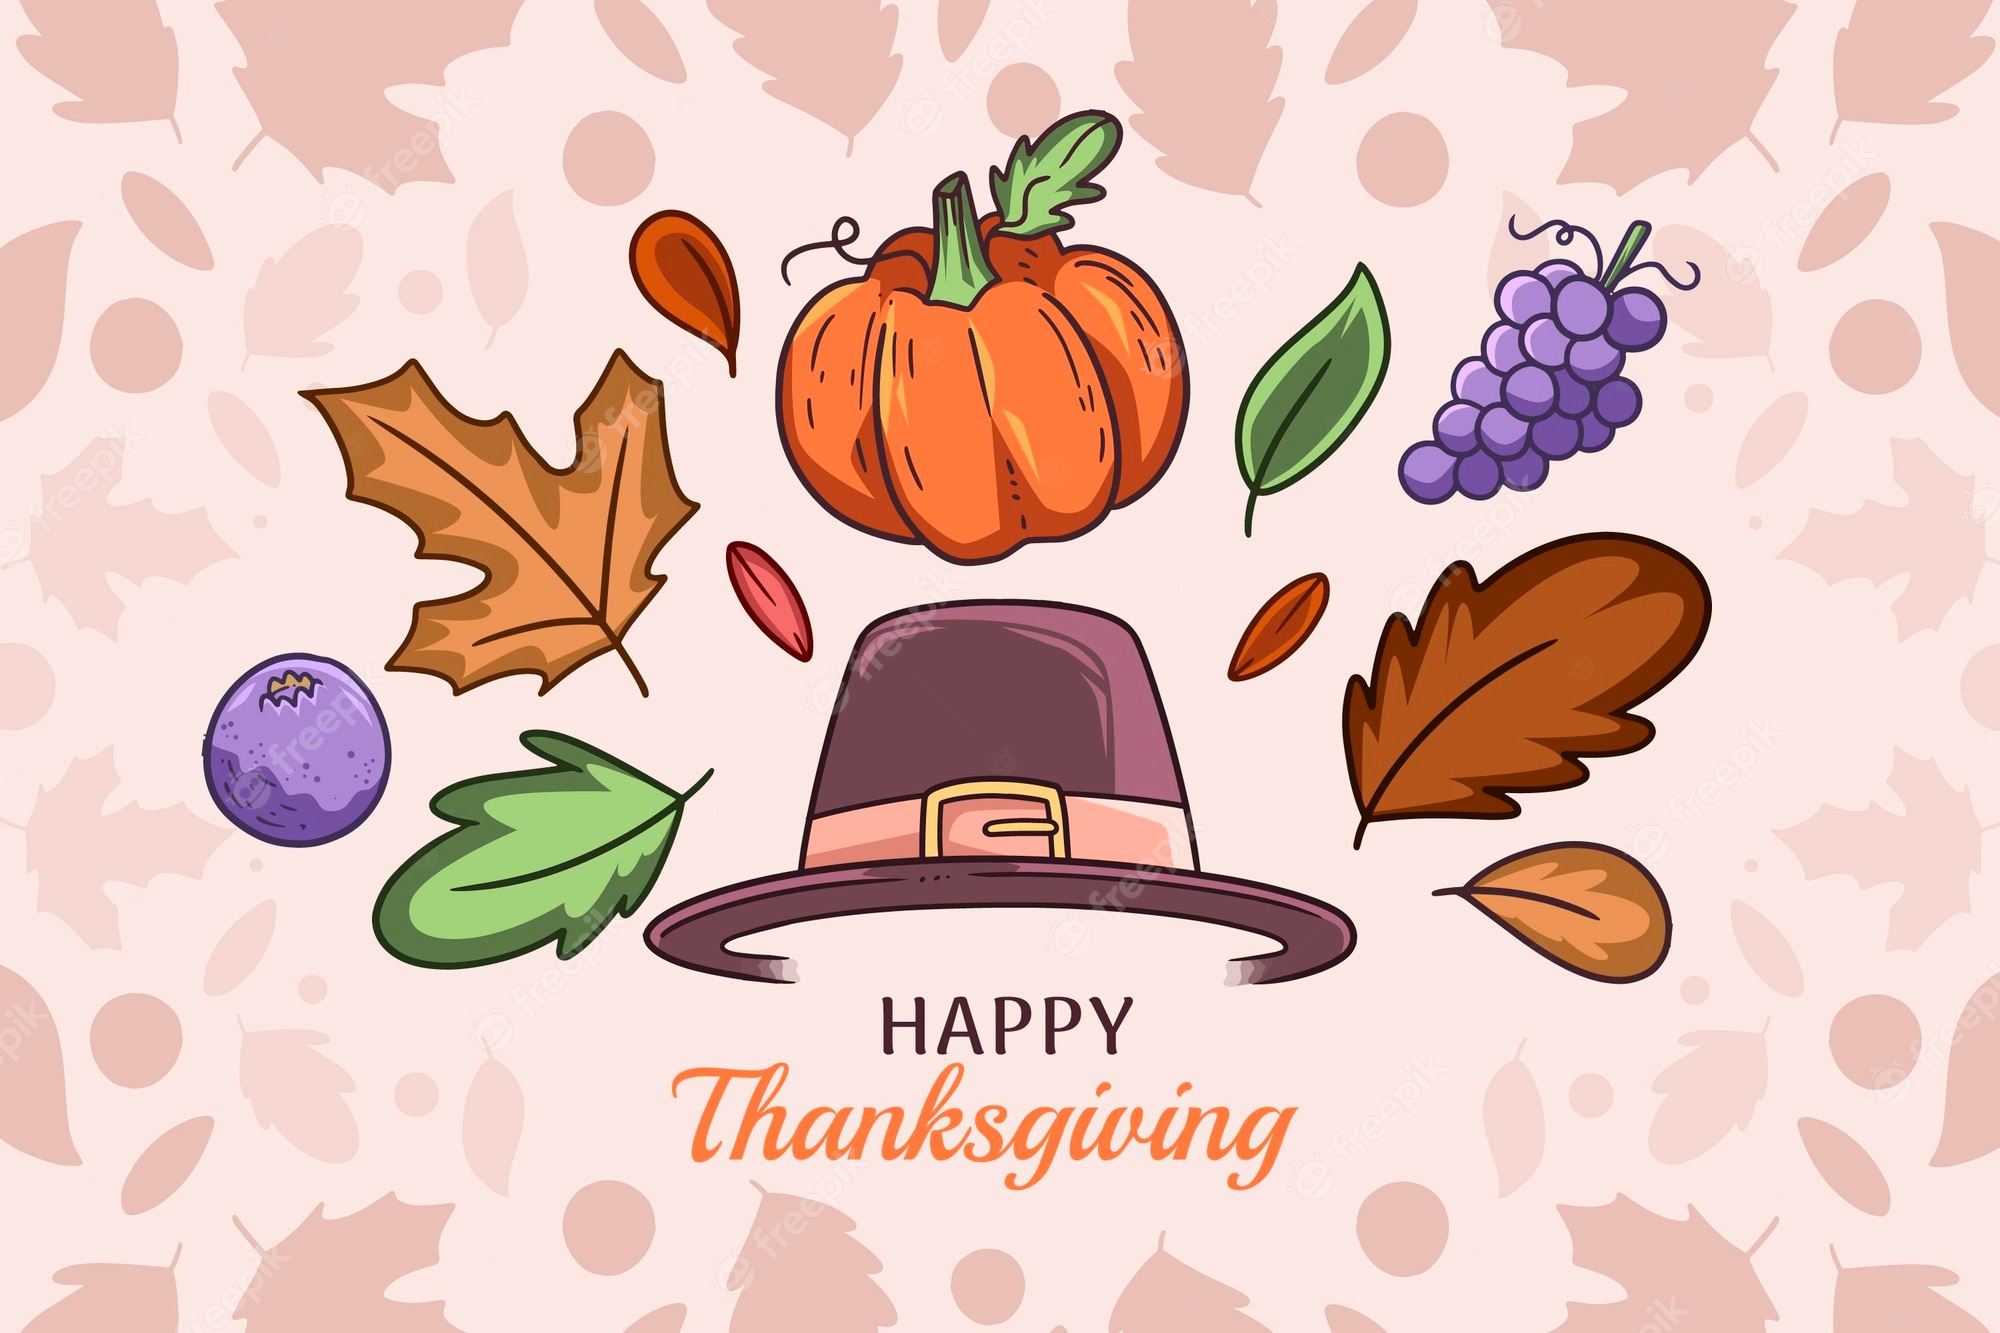 Thanksgiving background with pumpkin, leaves, grapes and a hat - Thanksgiving